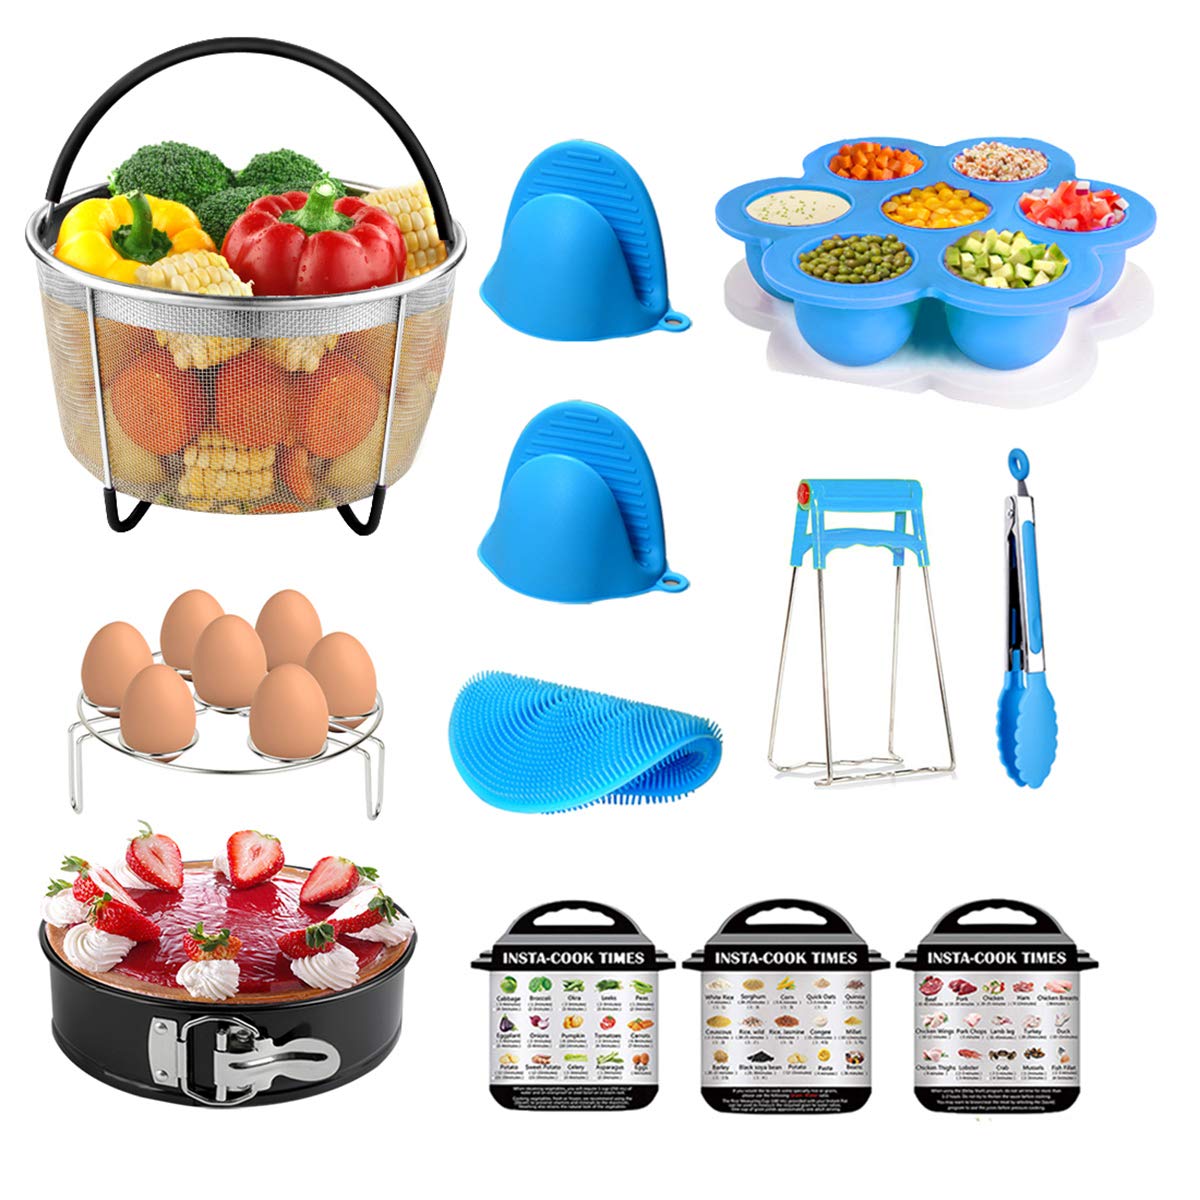 12 Piece Kit for Instant Pot Accessories for 6 QT, 8 QT Include Mesh Steamer Basket, Springform Pan, Egg Bites Mold, Egg Rack, Magnetic Cheat Sheet, Silicone Scrub, Mini Mitts, Bowl Clip and Food Tong